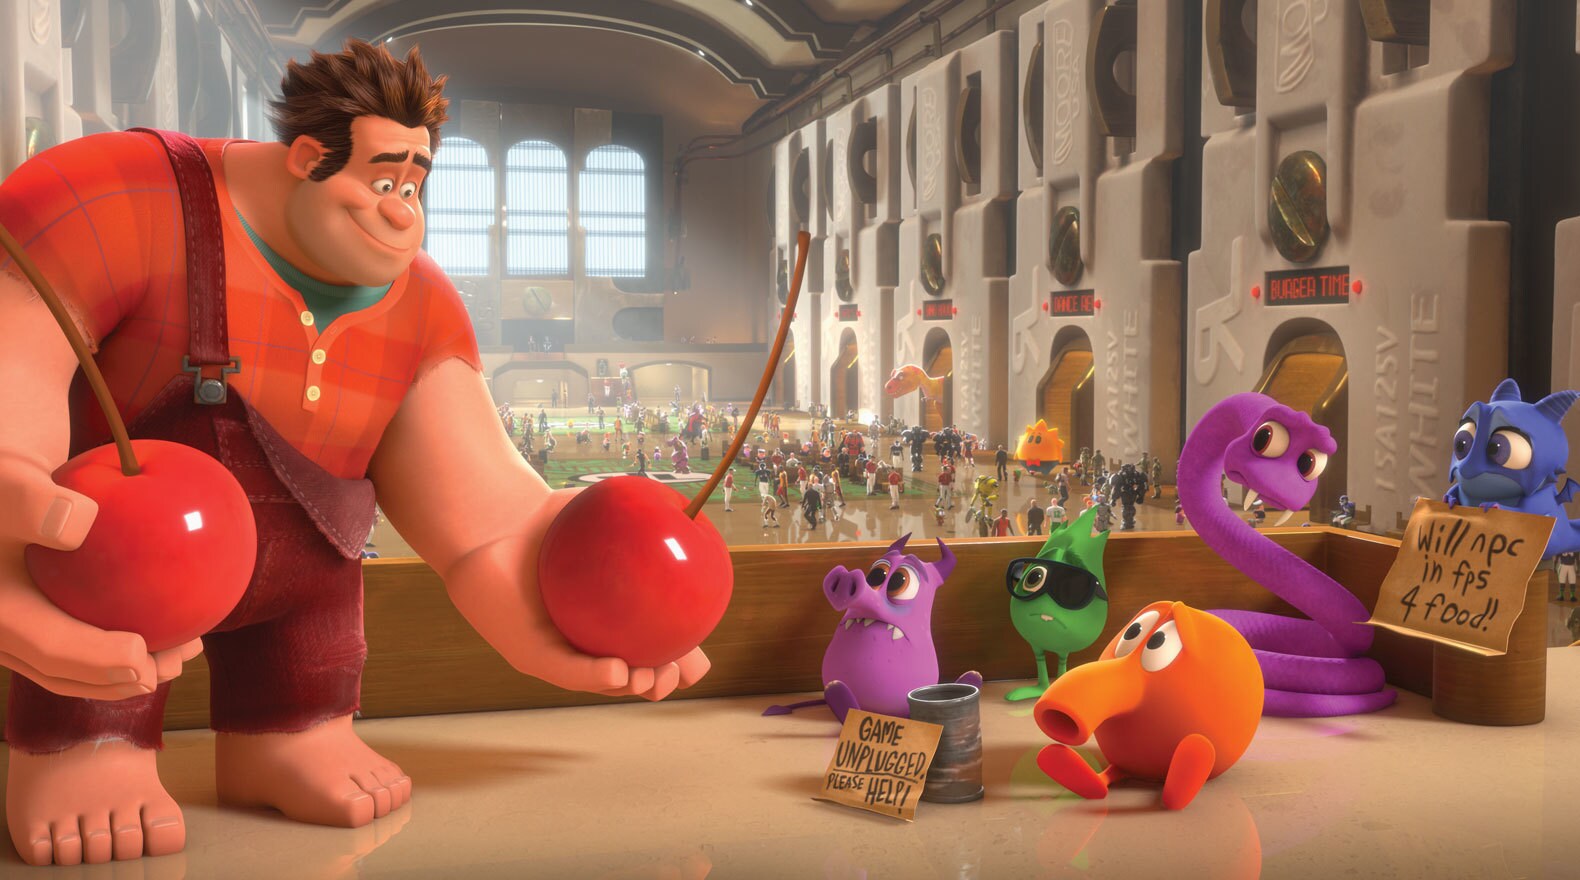 Ralph played by John C. Riley offering a cherry to some displaced game characters in Game Central Station in "Wreck-It Ralph"